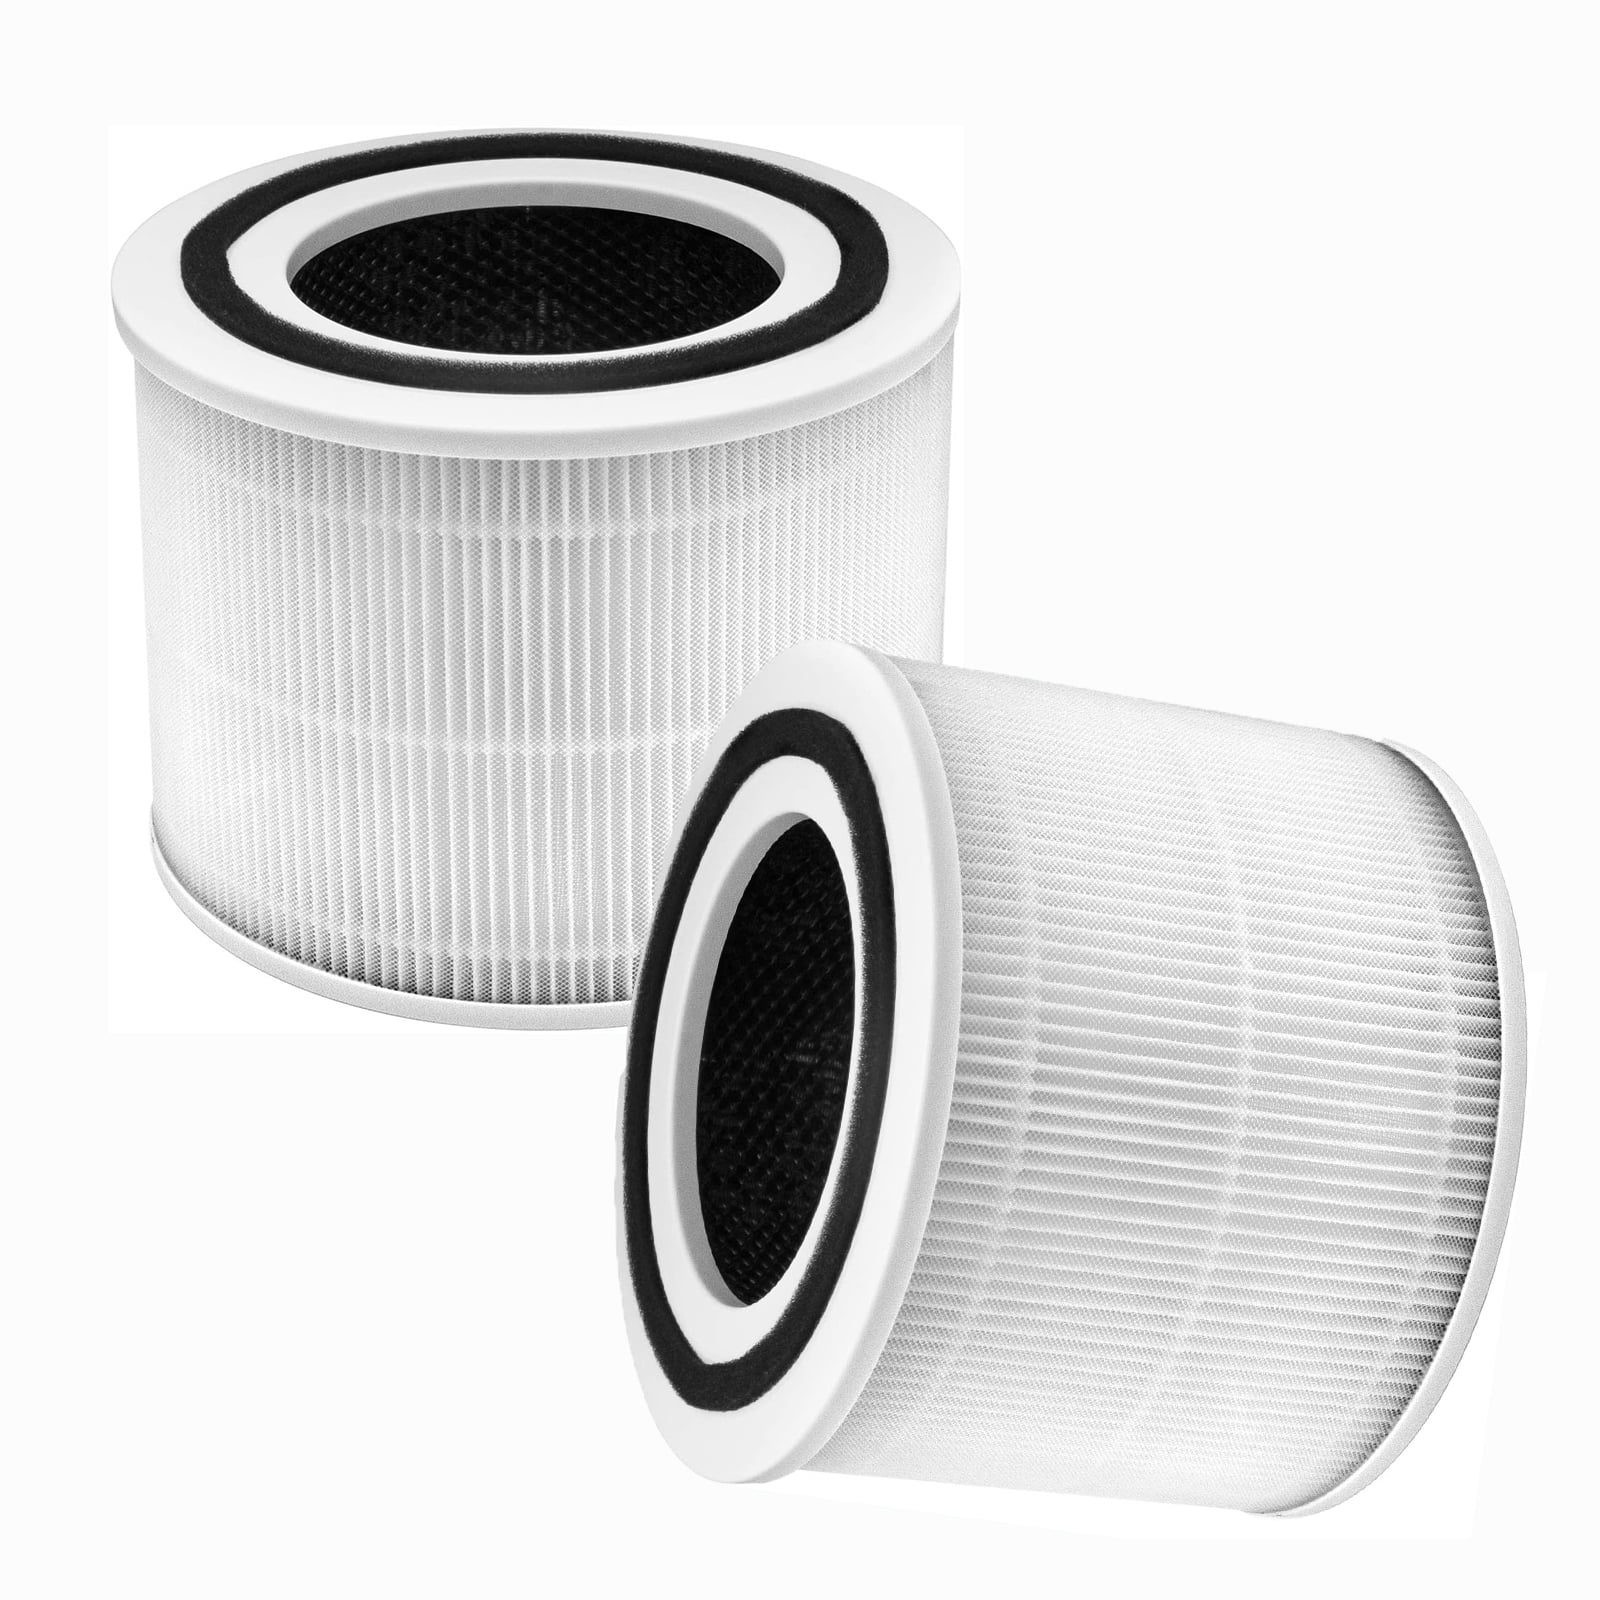 Replacement Filter Set fits Levoit Core 300  air purifier 3 in 1